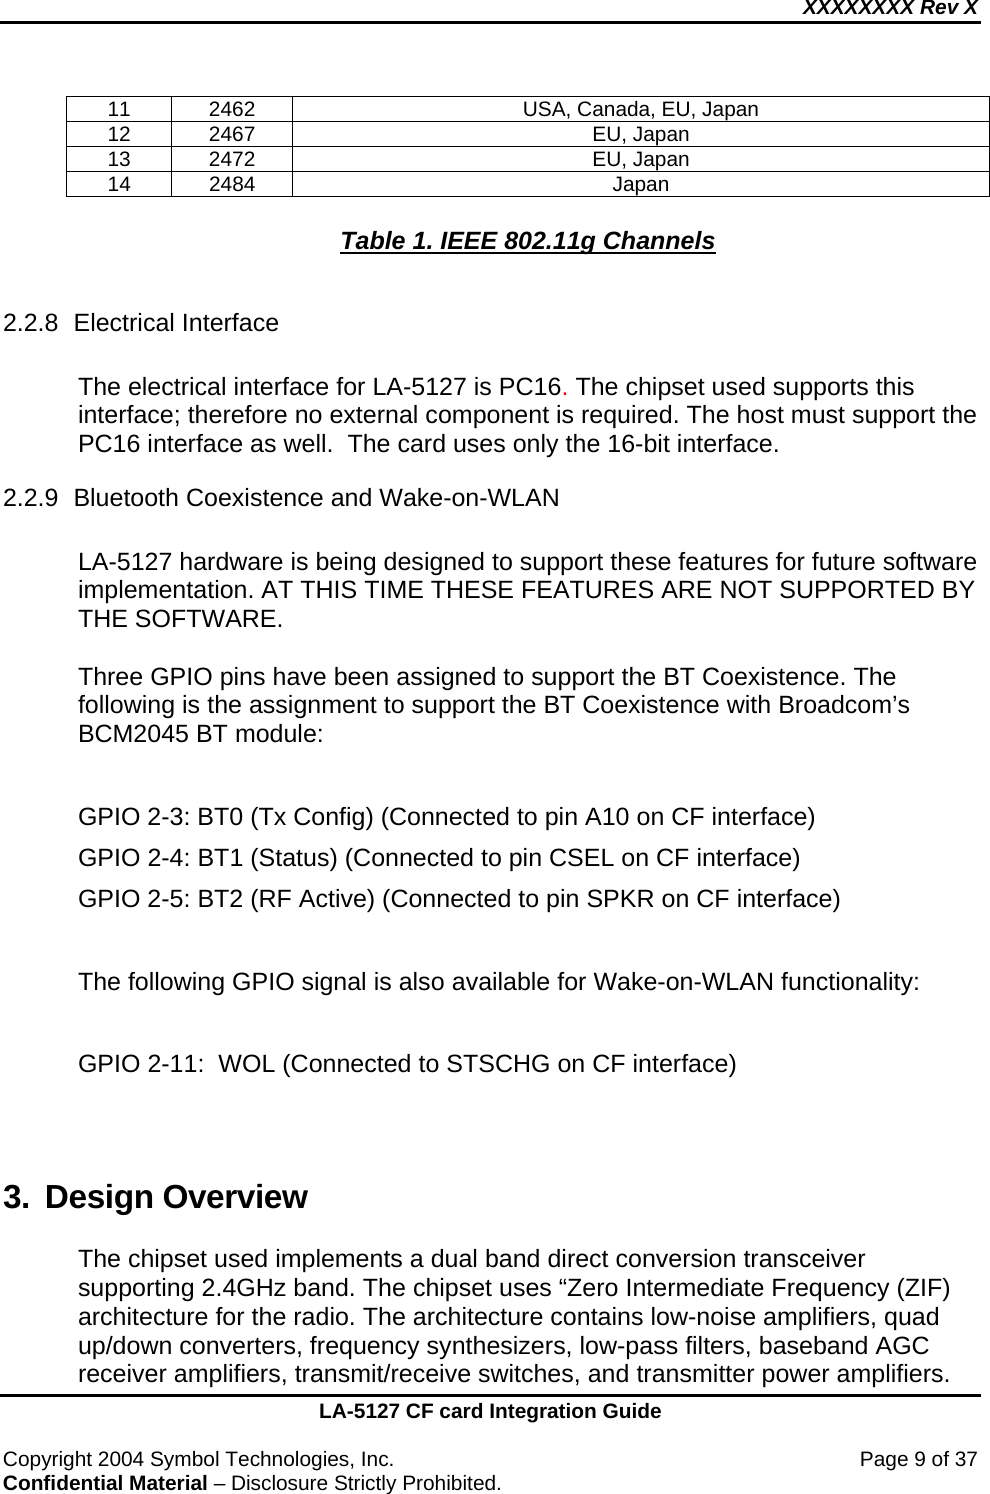 XXXXXXXX Rev X    LA-5127 CF card Integration Guide  Copyright 2004 Symbol Technologies, Inc.    Page 9 of 37 Confidential Material – Disclosure Strictly Prohibited. 11  2462  USA, Canada, EU, Japan 12 2467  EU, Japan 13 2472  EU, Japan 14 2484  Japan  Table 1. IEEE 802.11g Channels  2.2.8 Electrical Interface  The electrical interface for LA-5127 is PC16. The chipset used supports this interface; therefore no external component is required. The host must support the PC16 interface as well.  The card uses only the 16-bit interface.  2.2.9 Bluetooth Coexistence and Wake-on-WLAN    LA-5127 hardware is being designed to support these features for future software implementation. AT THIS TIME THESE FEATURES ARE NOT SUPPORTED BY THE SOFTWARE.  Three GPIO pins have been assigned to support the BT Coexistence. The following is the assignment to support the BT Coexistence with Broadcom’s BCM2045 BT module:  GPIO 2-3: BT0 (Tx Config) (Connected to pin A10 on CF interface) GPIO 2-4: BT1 (Status) (Connected to pin CSEL on CF interface)  GPIO 2-5: BT2 (RF Active) (Connected to pin SPKR on CF interface)  The following GPIO signal is also available for Wake-on-WLAN functionality:  GPIO 2-11:  WOL (Connected to STSCHG on CF interface)   3. Design Overview  The chipset used implements a dual band direct conversion transceiver supporting 2.4GHz band. The chipset uses “Zero Intermediate Frequency (ZIF) architecture for the radio. The architecture contains low-noise amplifiers, quad up/down converters, frequency synthesizers, low-pass filters, baseband AGC receiver amplifiers, transmit/receive switches, and transmitter power amplifiers. 